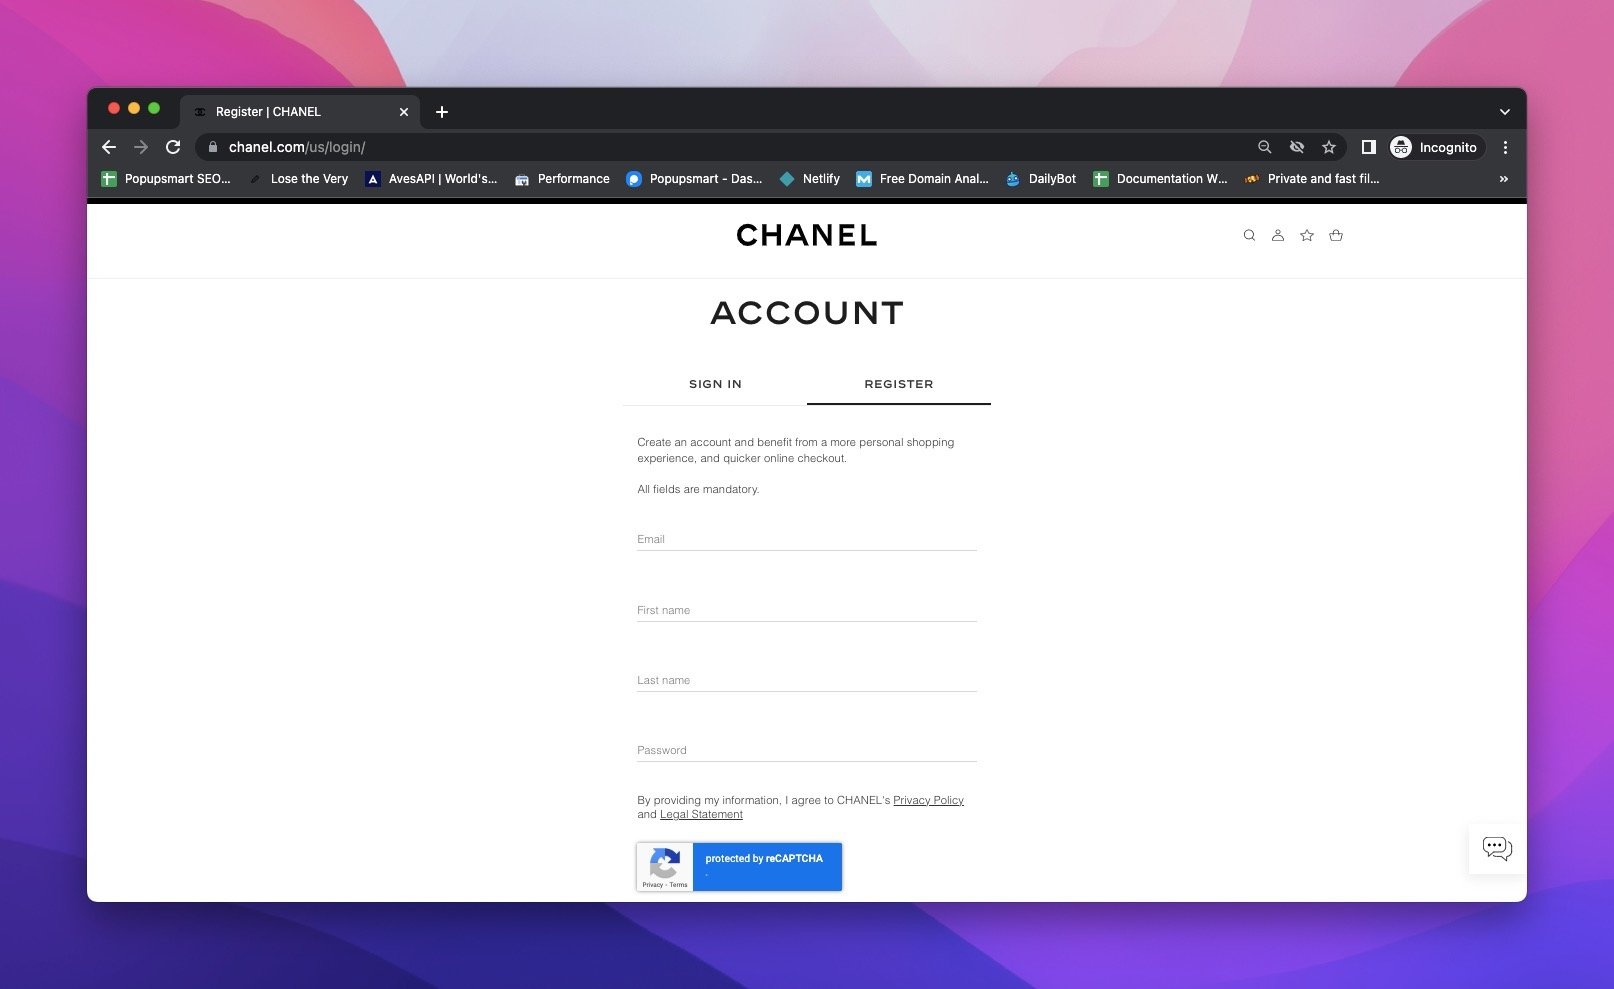 Chanel's customer registration page